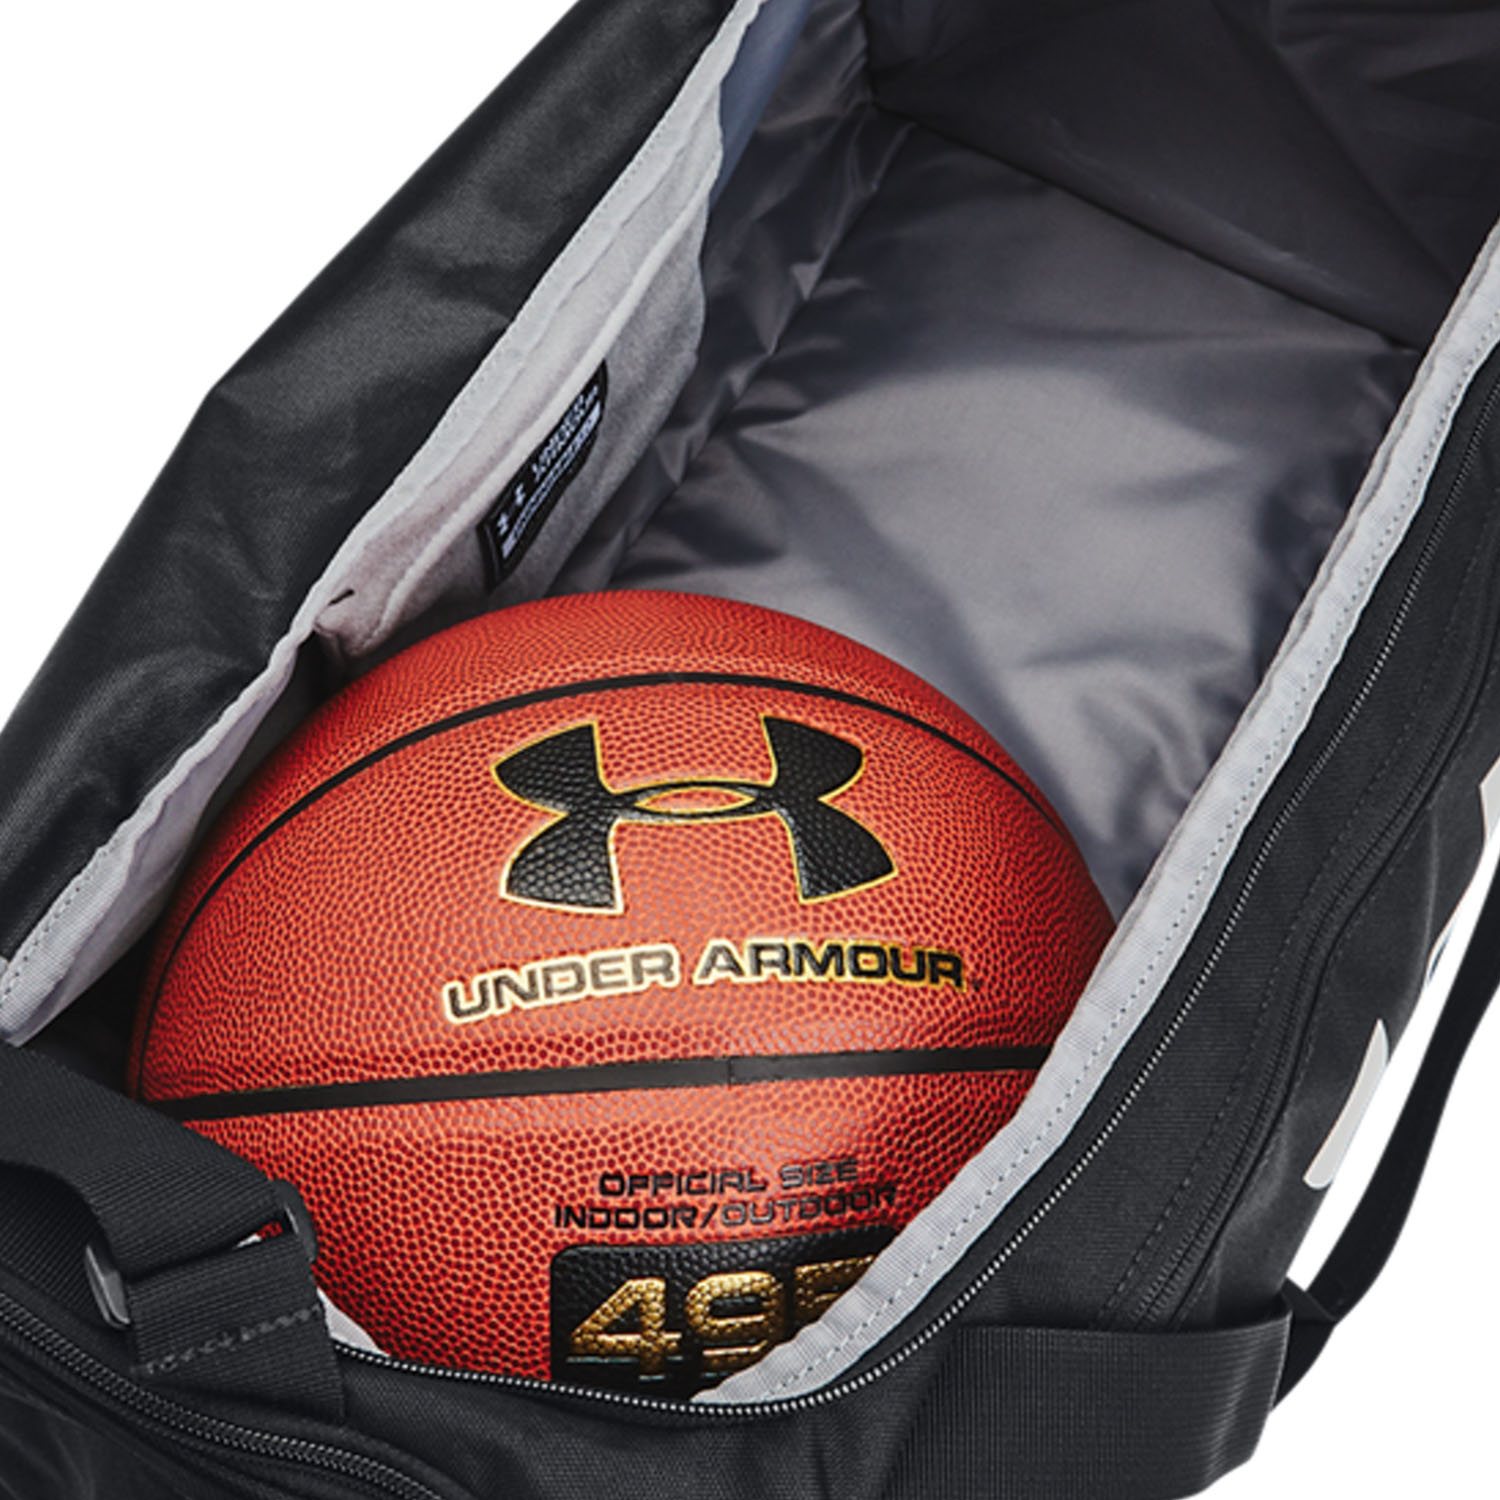 Under Armour Undeniable 5.0 Small Duffle - Black/Metallic Silver